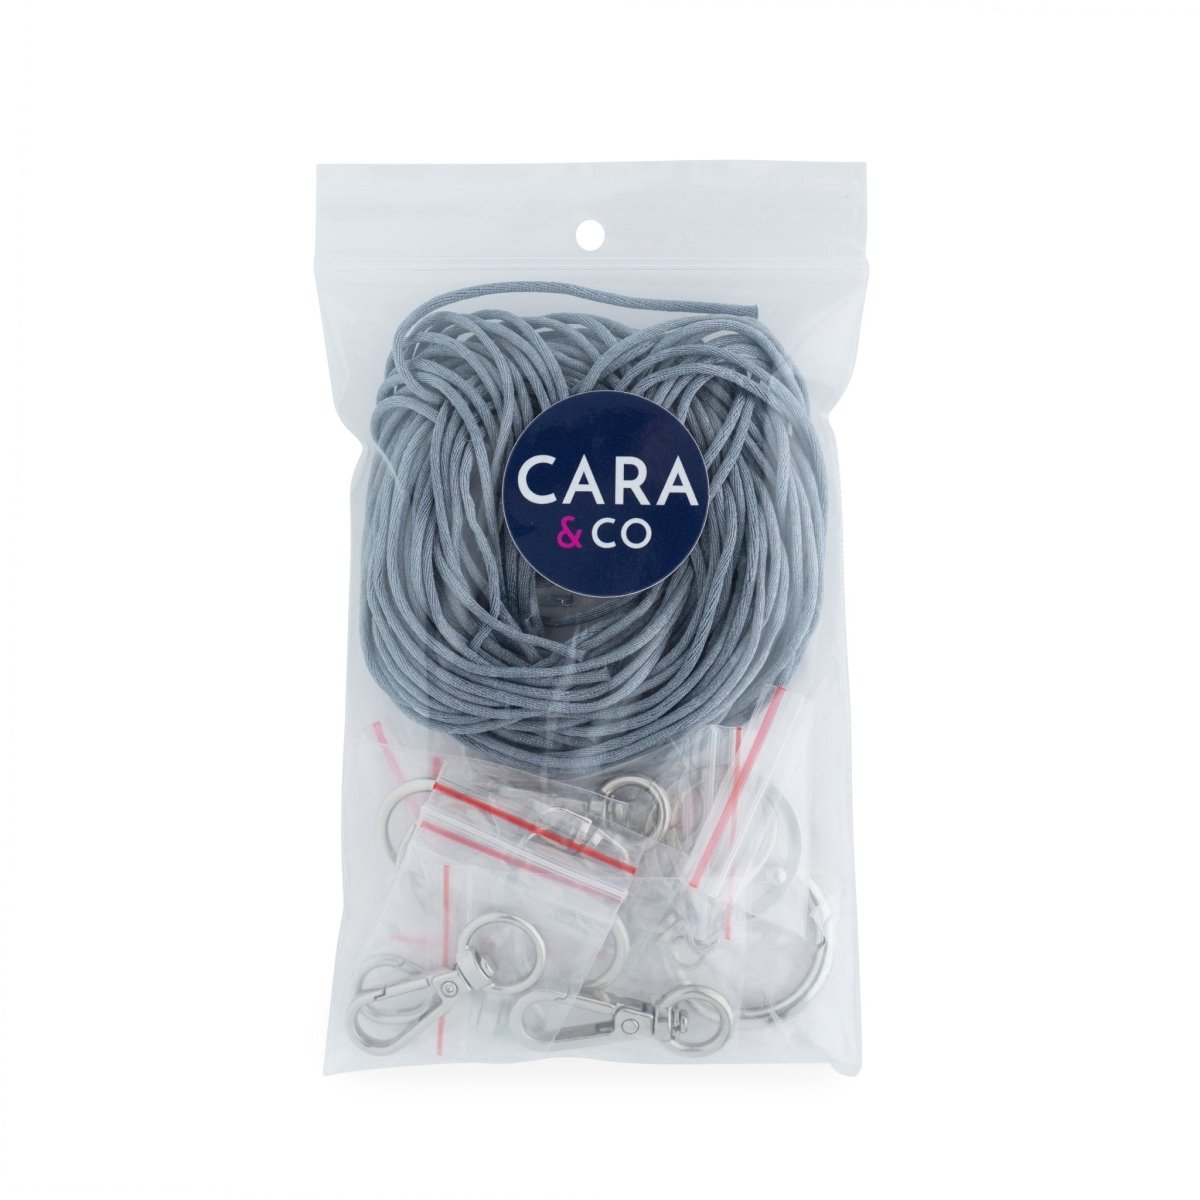 Clips Accessory Packs Silver - Grey from Cara & Co Craft Supply